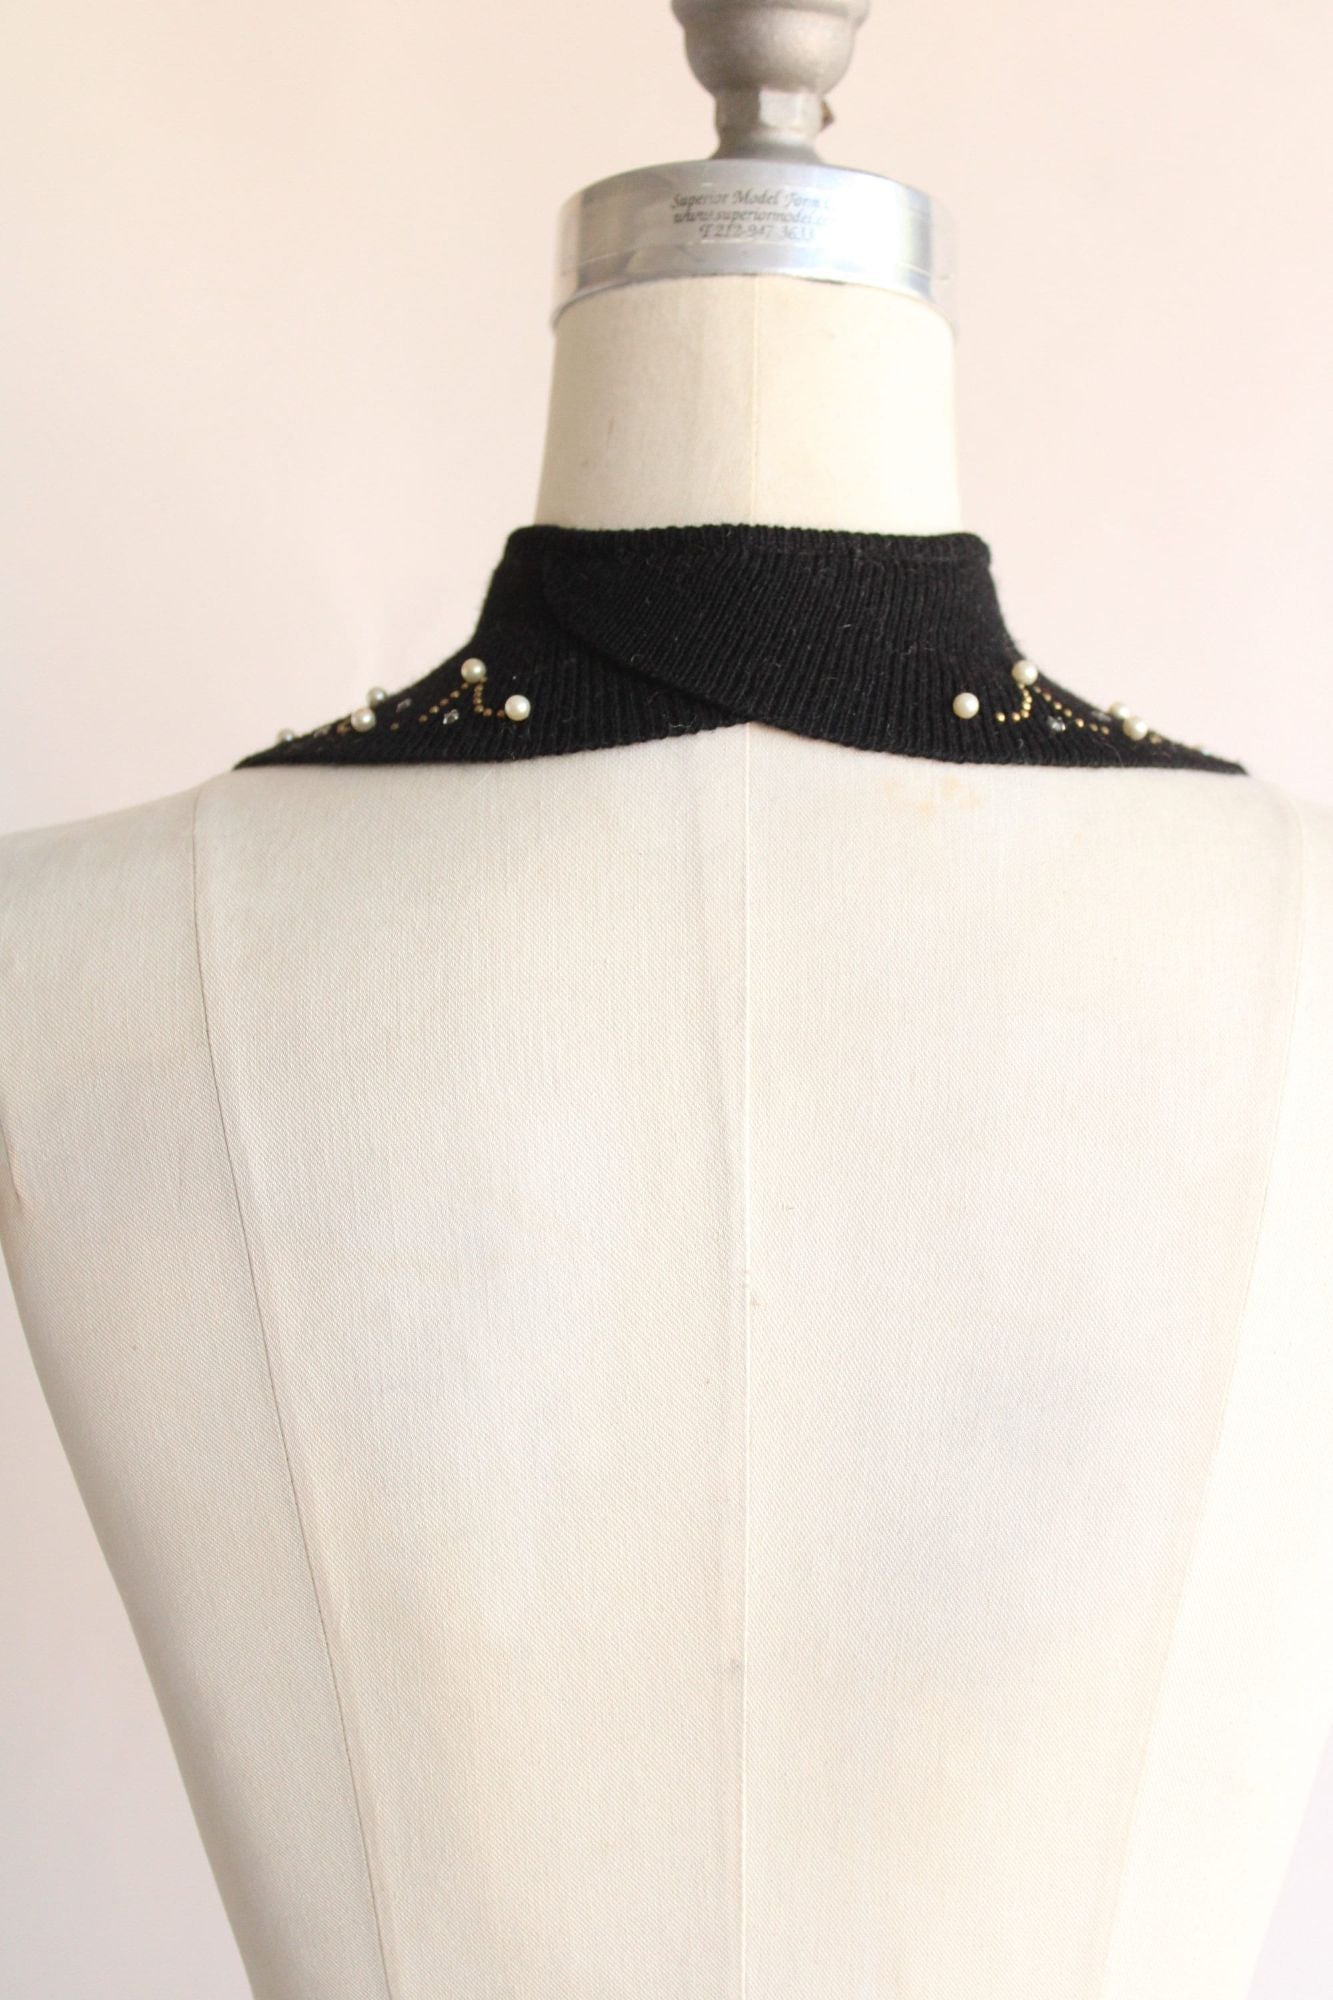 Vintage 1950s Black Knit Wool Removable Collar With Tie and Beading